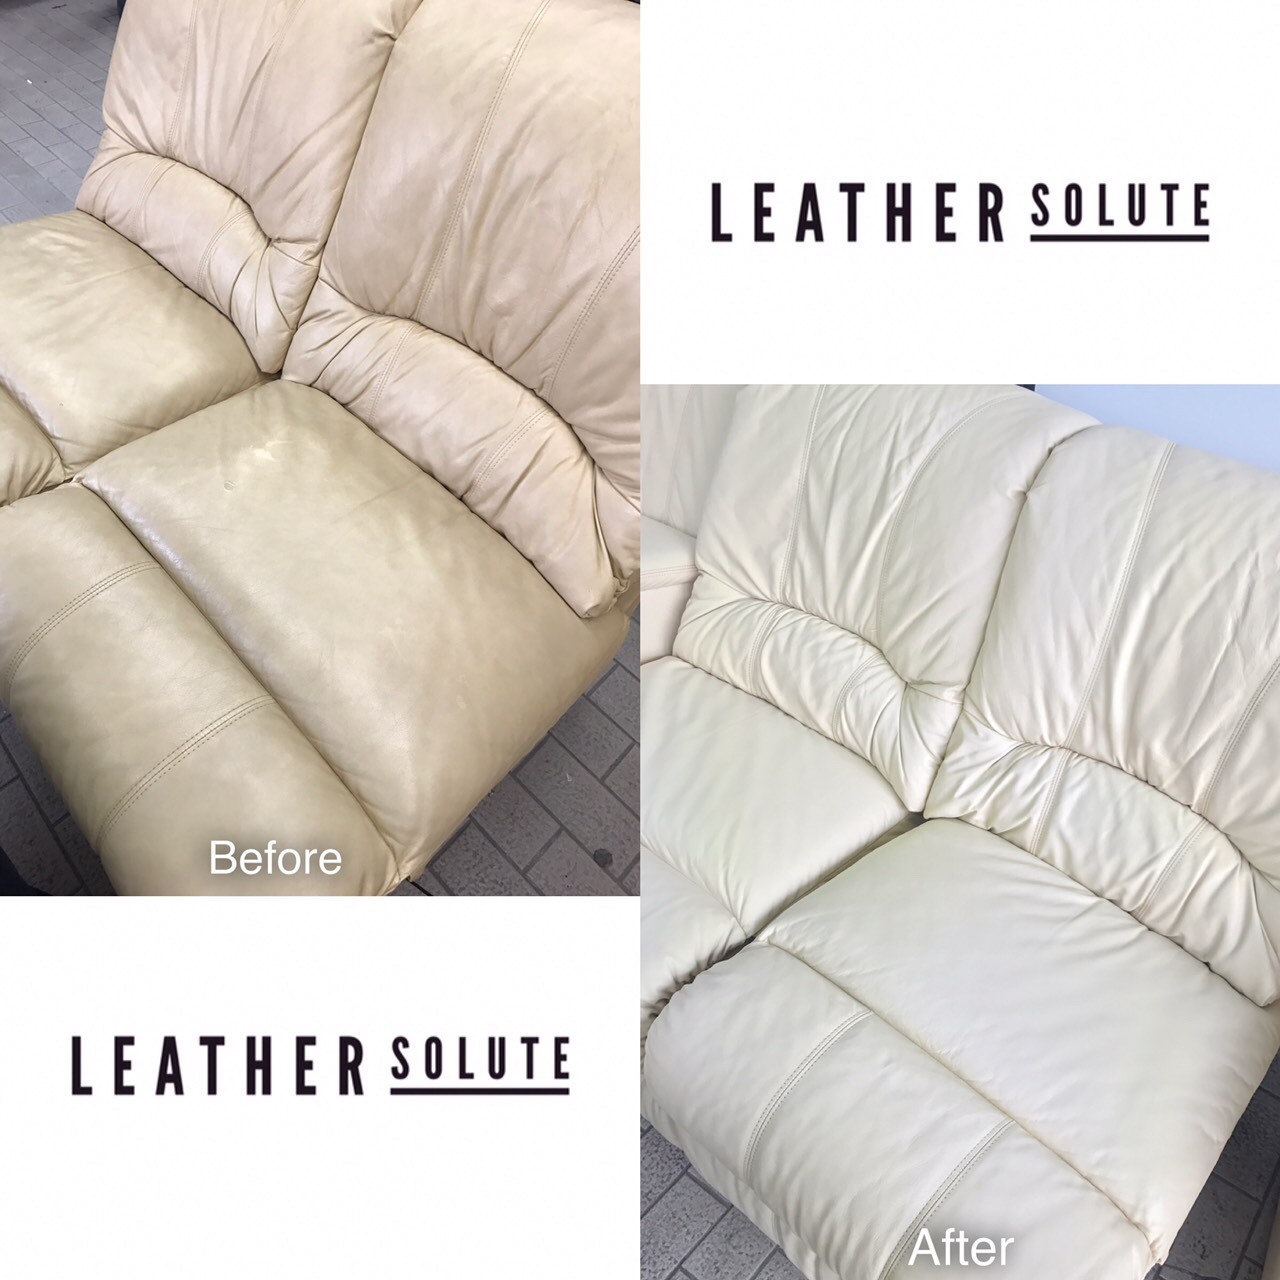 //leathersolute.co.th/wp-content/uploads/2018/12/Cleaning-furniture_๑๘๑๒๓๐_0008.jpg